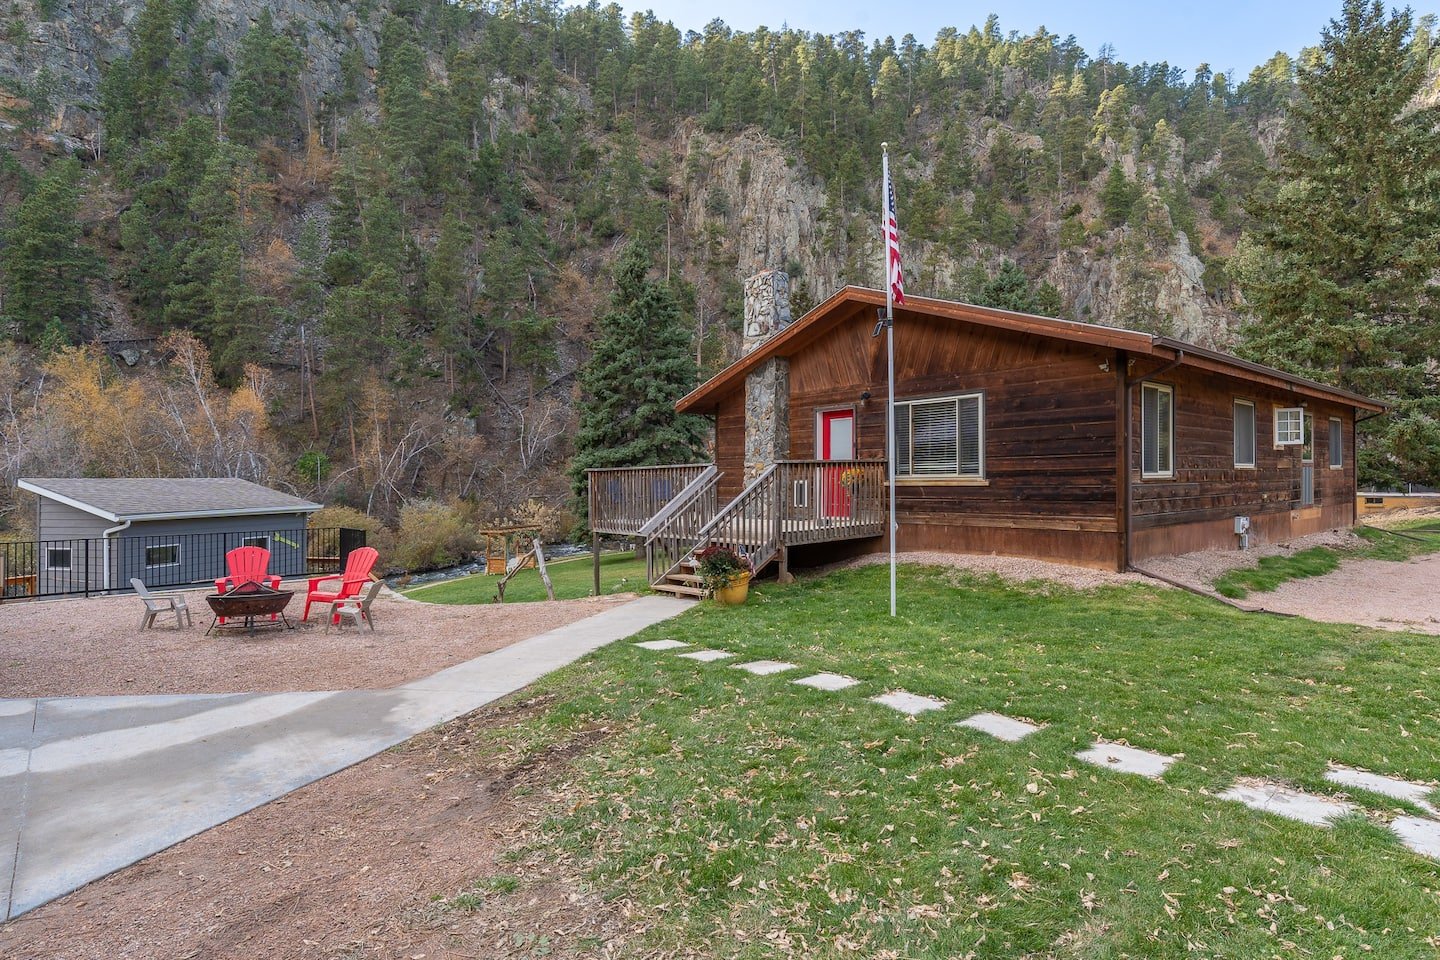  With a million-dollar view, this  homey cabin  sits on a creek in the Black Hills of South Dakota. Guests can experience the serene sounds and hike  Badlands National Park , Wind Caves National Park and Custer State Park.    Typical starting price: 